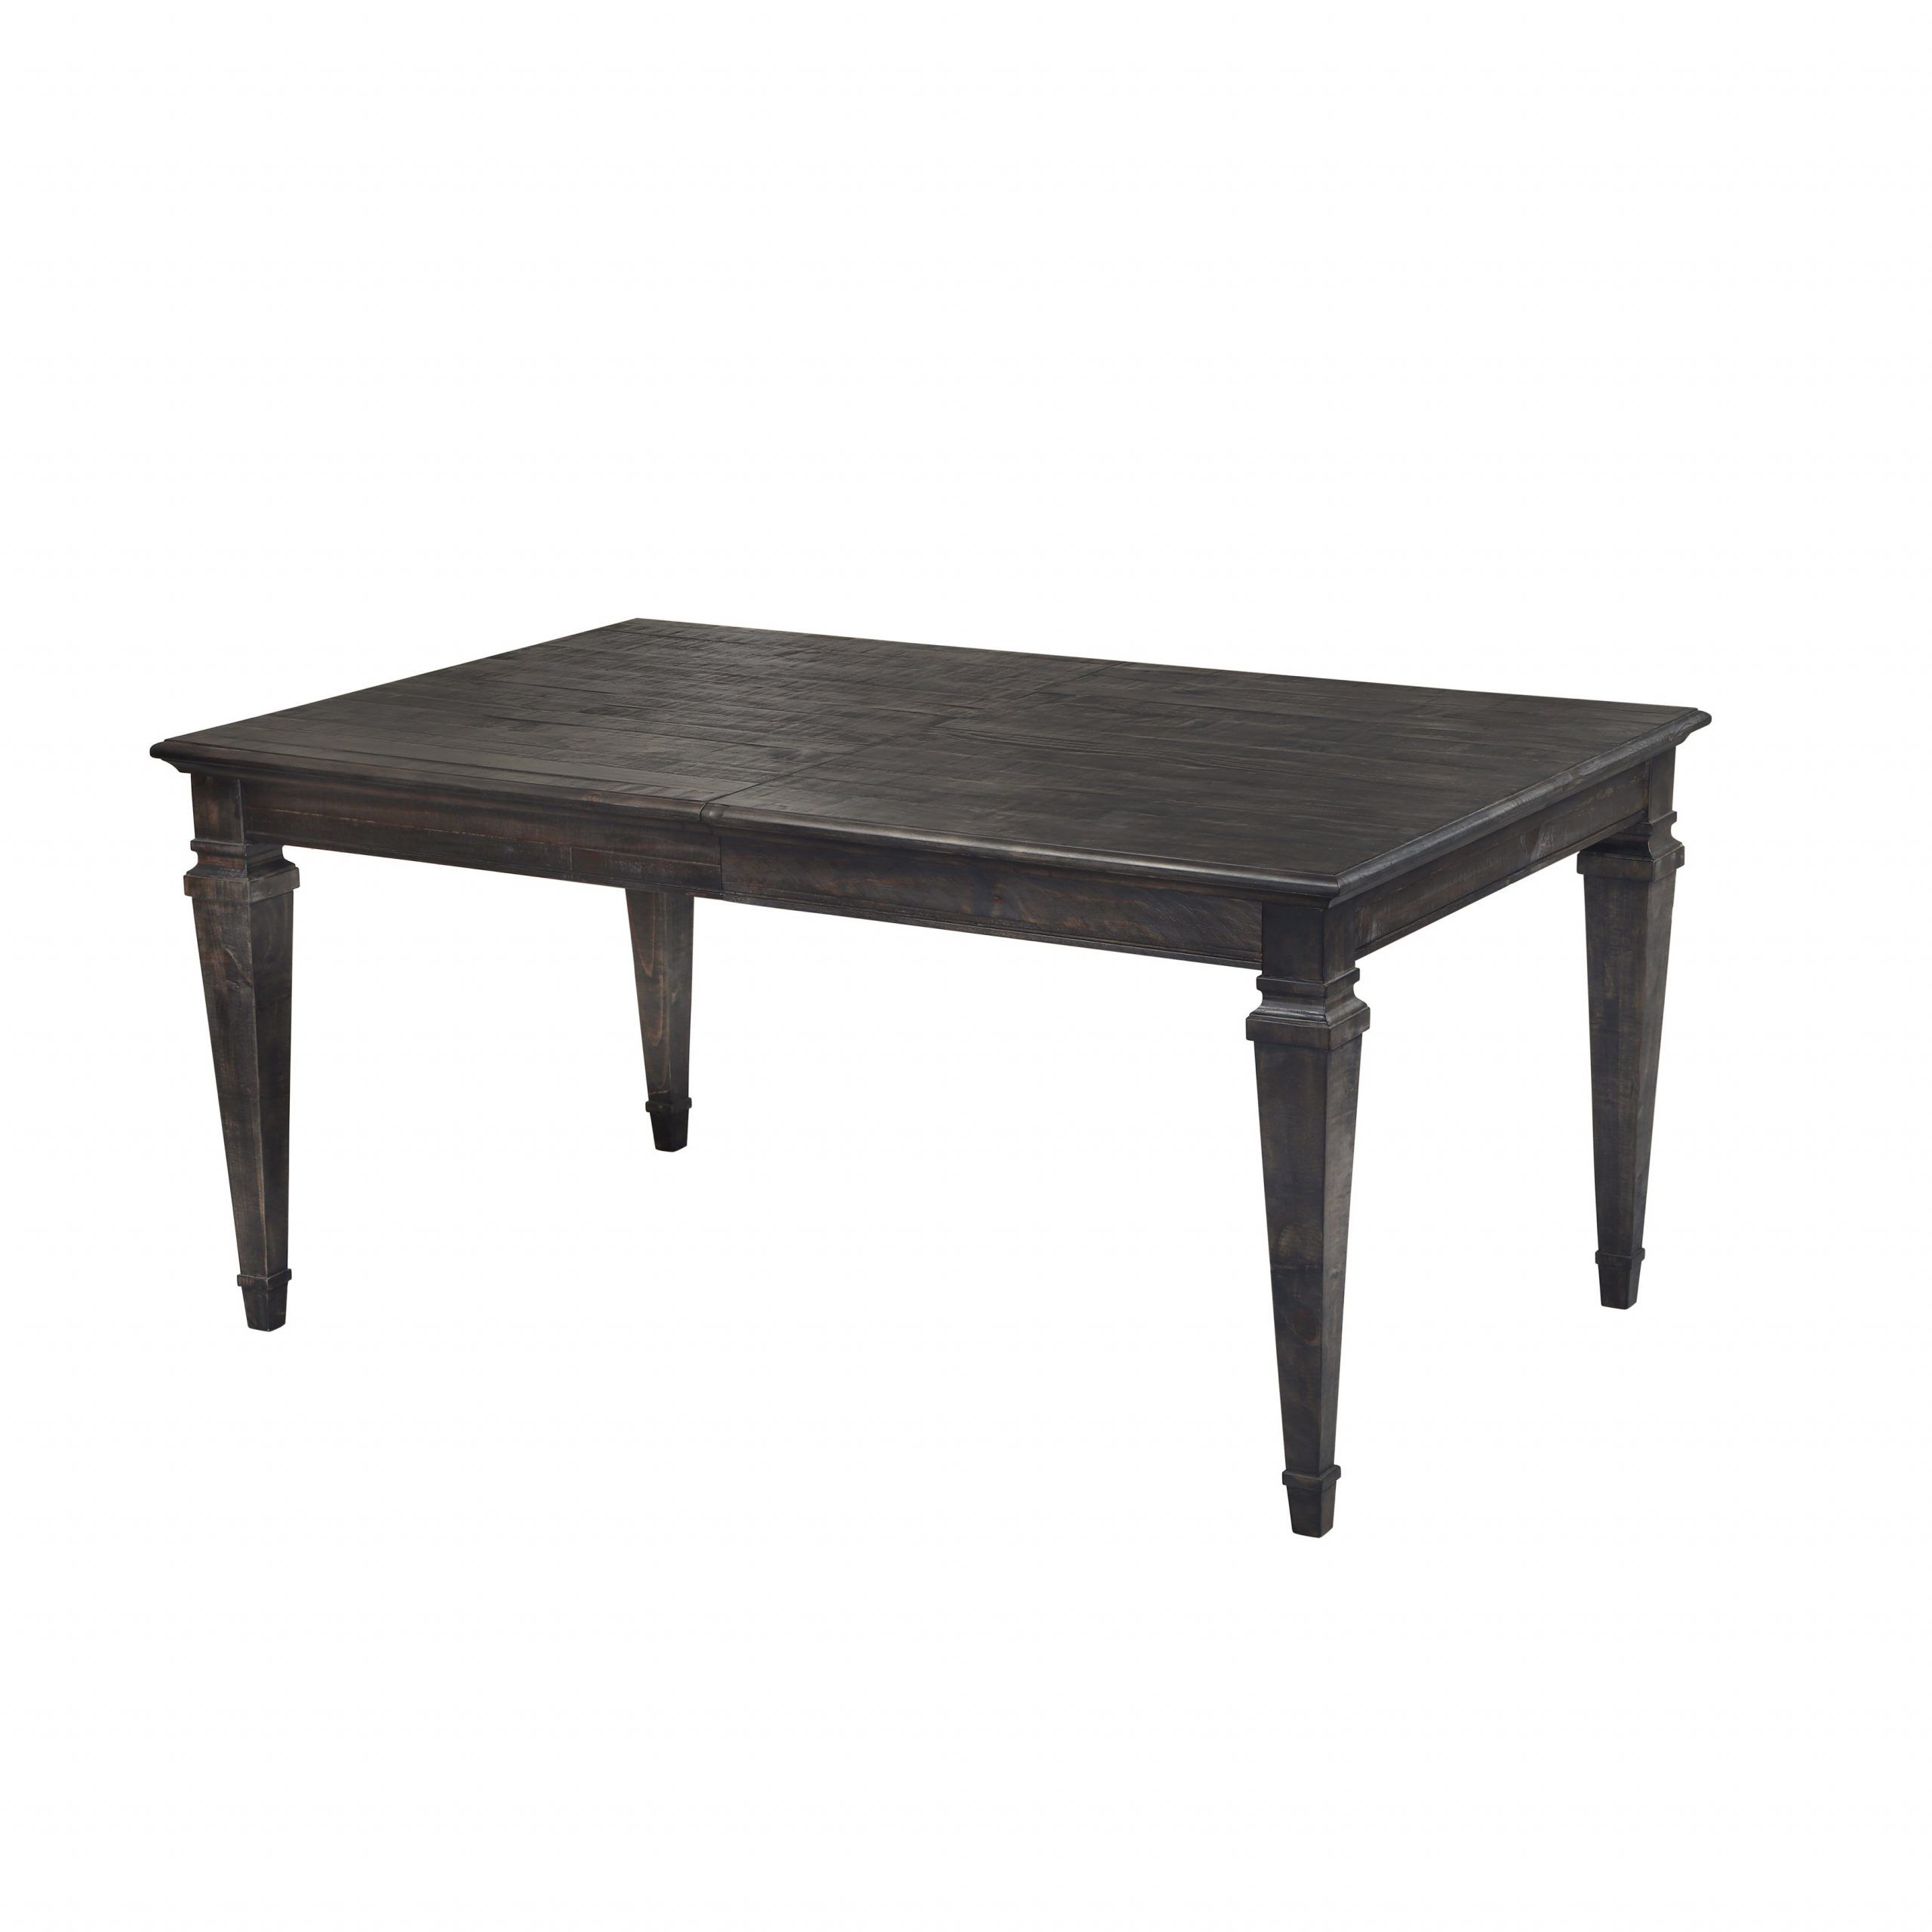 Most Up To Date Charcoal Transitional 6 Seating Rectangular Dining Tables Intended For Magnussen Home Furnishings Sutton Place Weather Charcoal Rectangular Dining  Table (View 14 of 30)